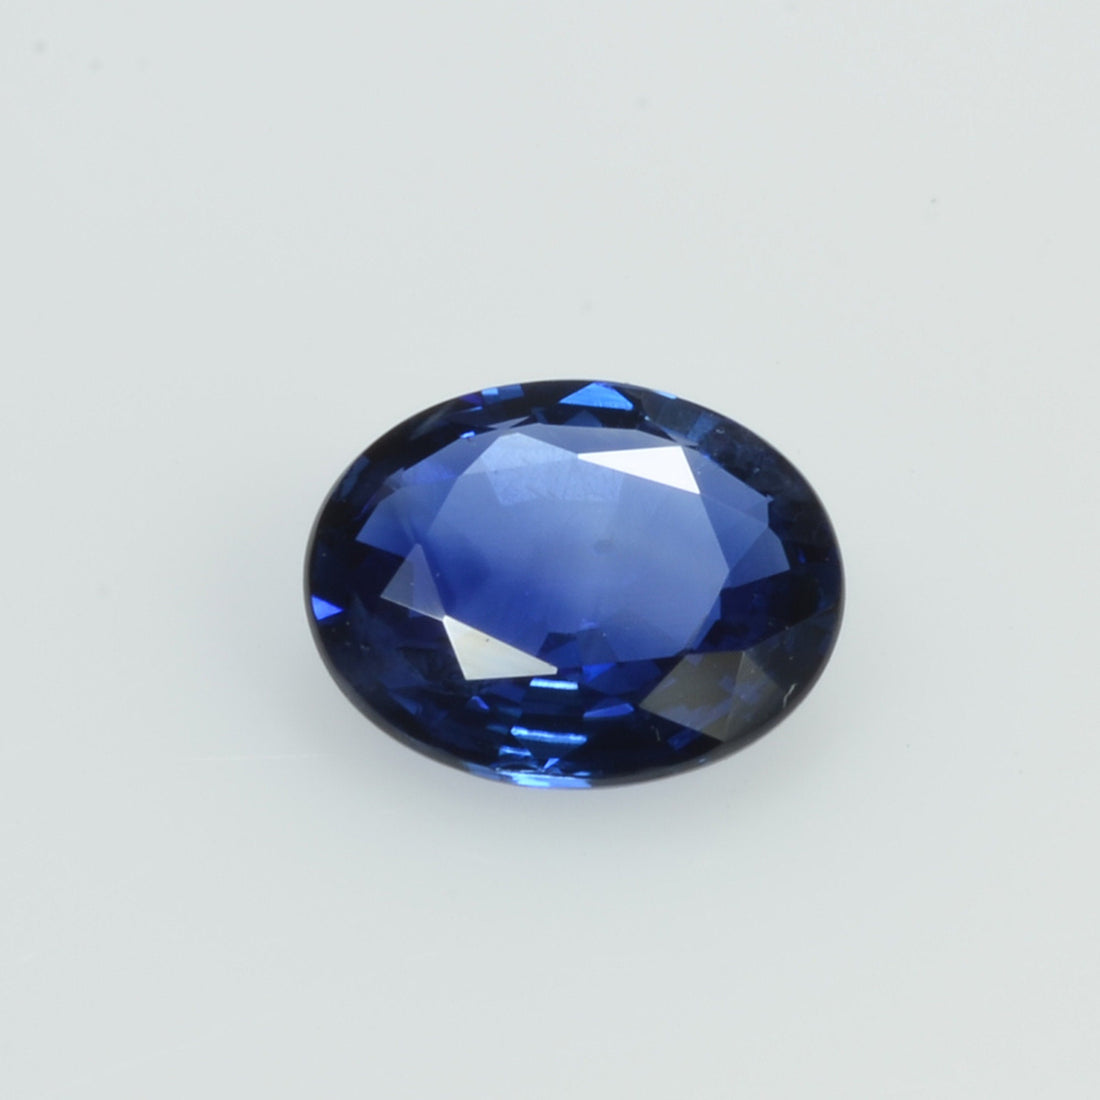 0.87 cts Natural Blue Sapphire Loose Gemstone Oval Cut